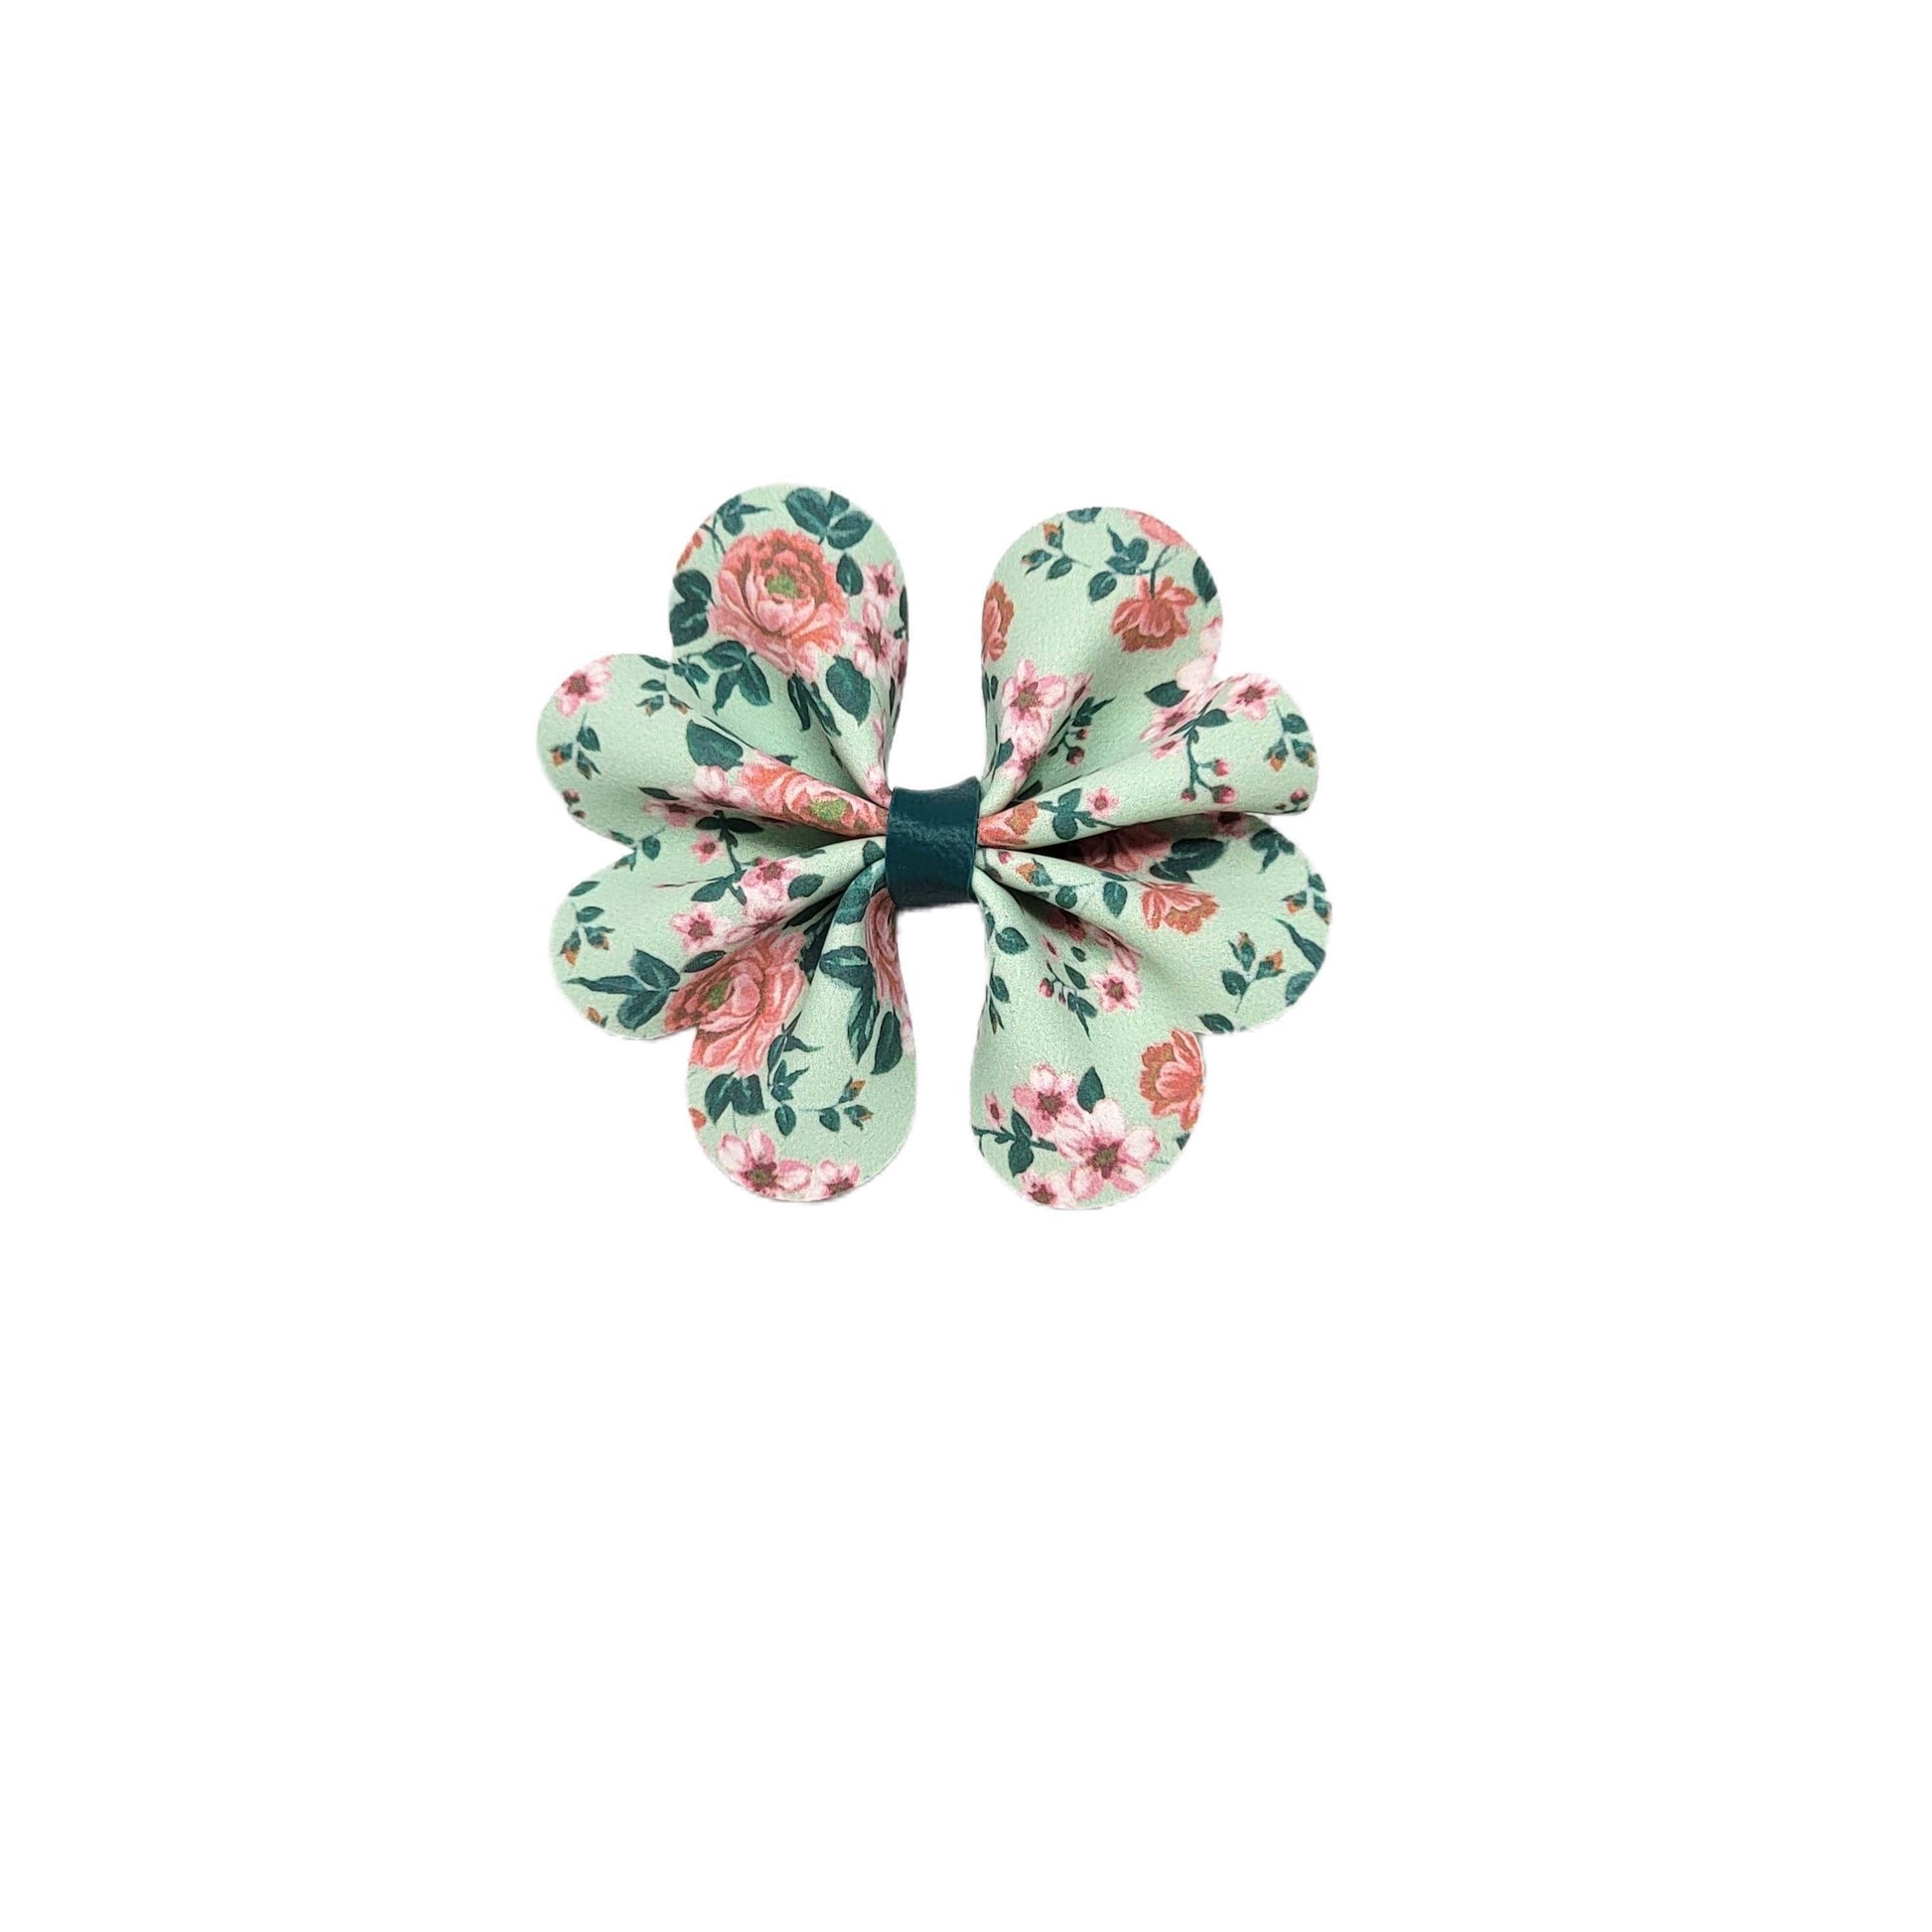 Roses on Mint Catalina Bow 3"